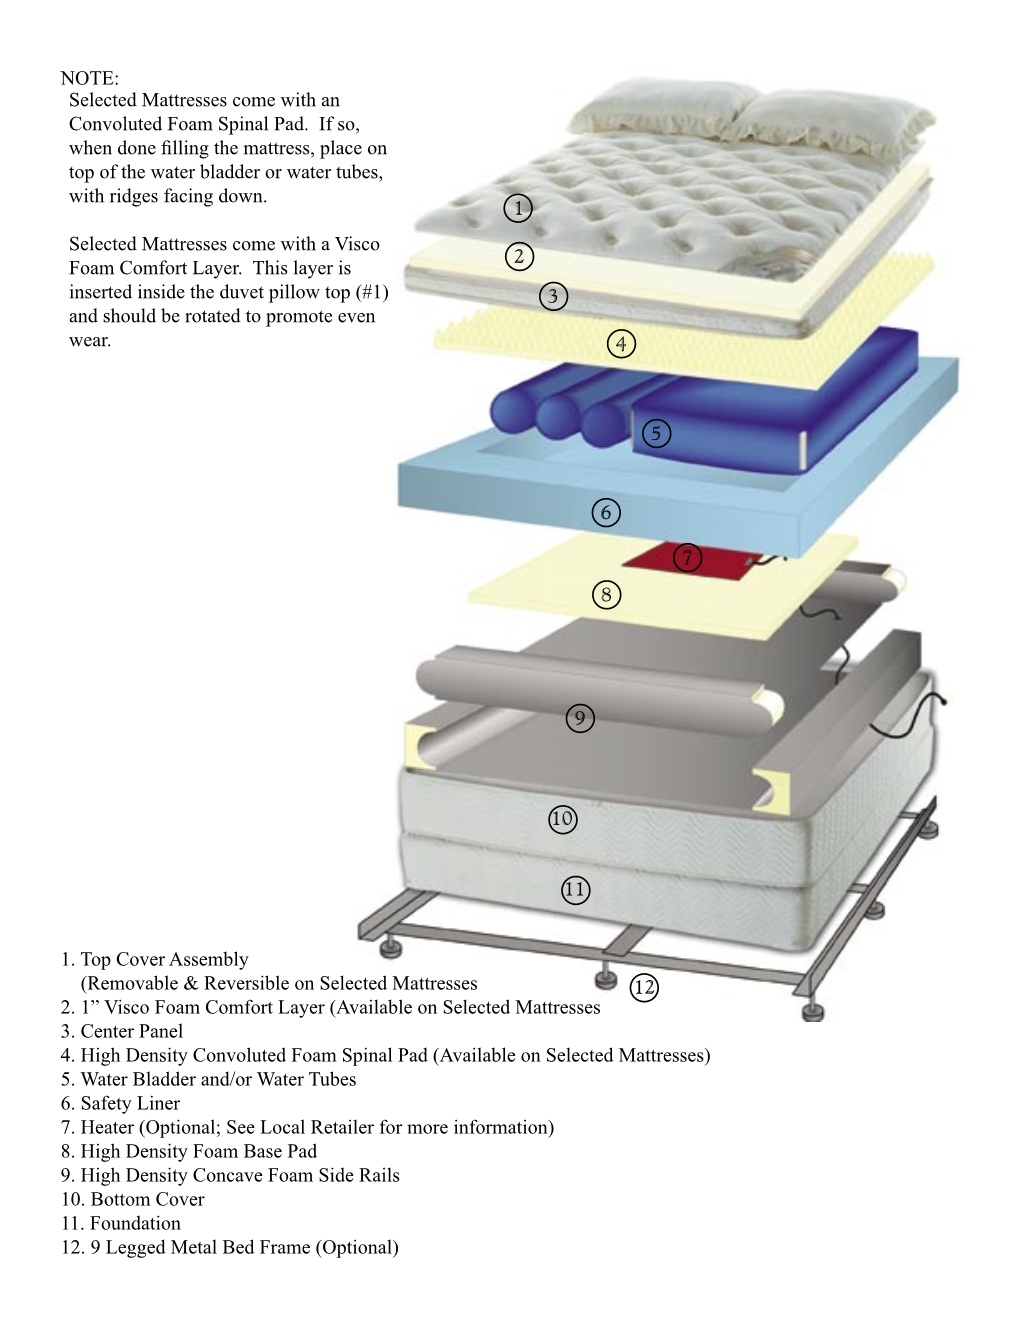 Selected Mattresses Come with an Convoluted Foam Spinal Pad. If So, When Done Filling the Mattress, Place on Top of the W